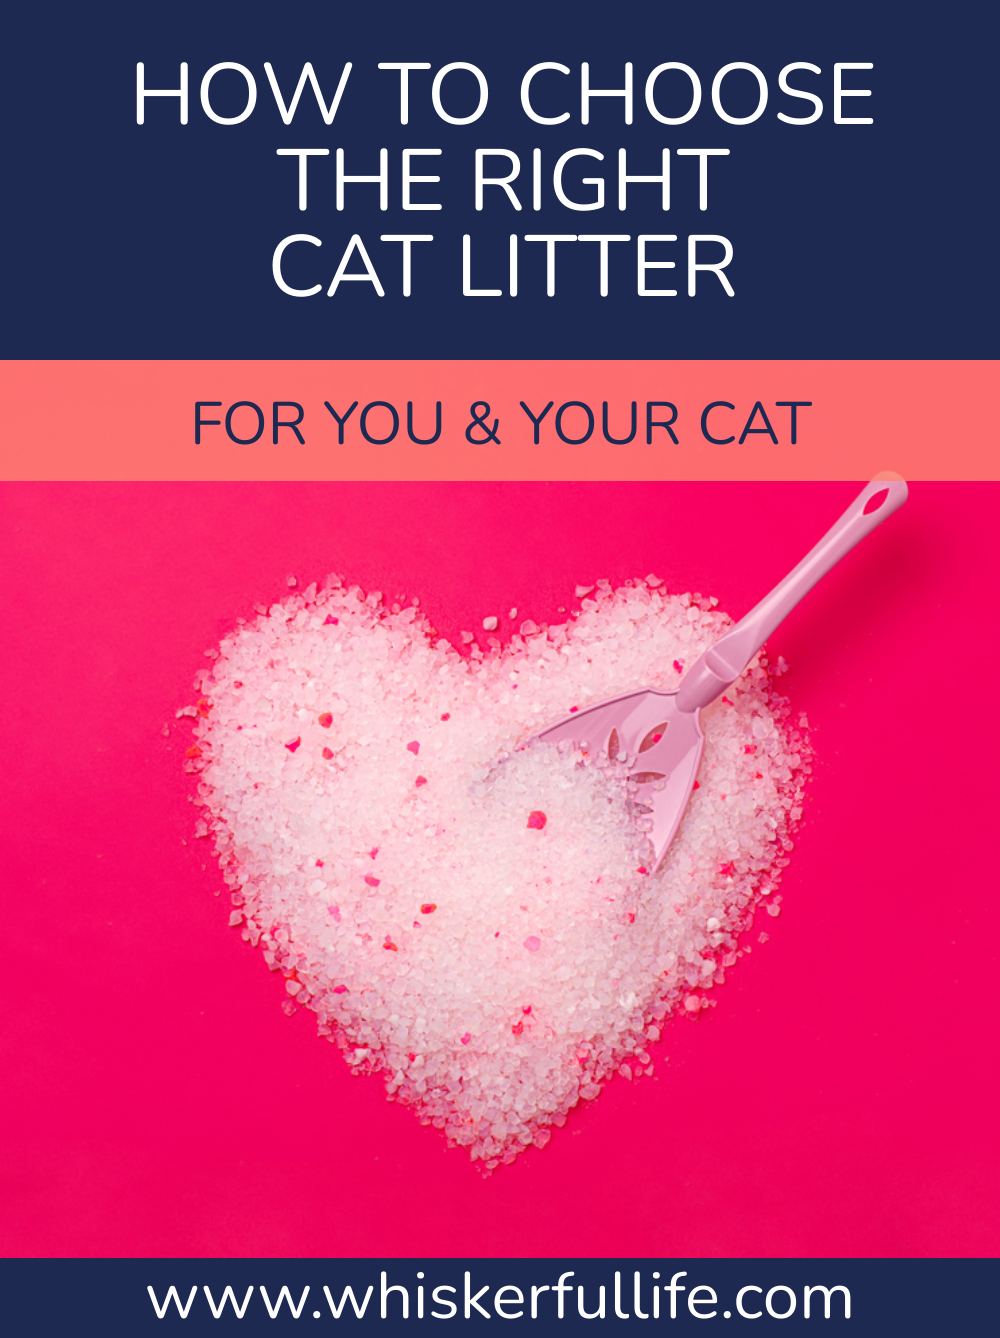 How To Choose The Right Cat Litter (For You & Your Cat)